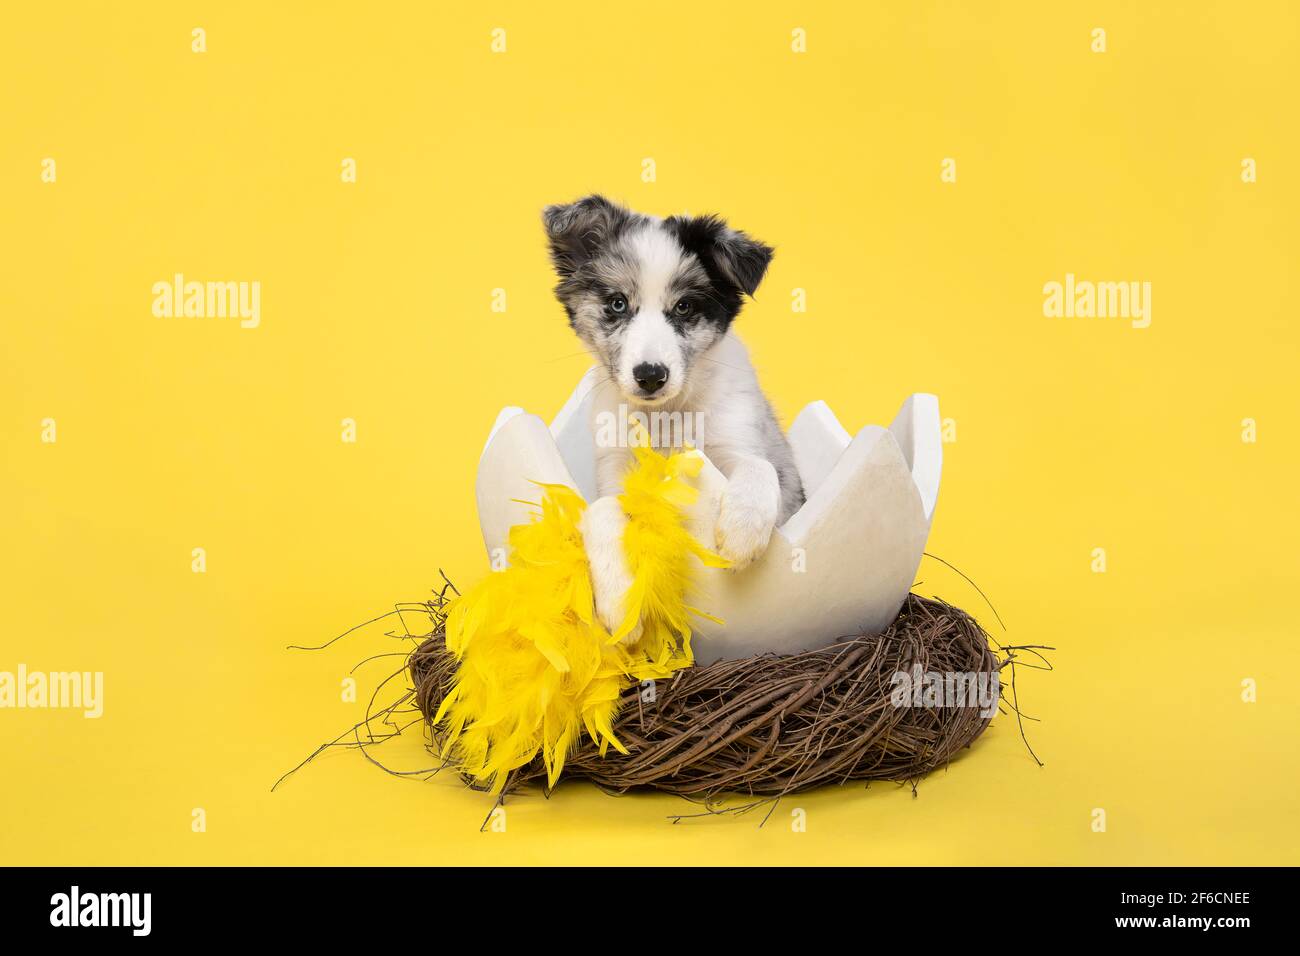 Cute border collie puppy in a easter egg shell in a animals nest with yellow feathers on a yellow background with space for copy Stock Photo